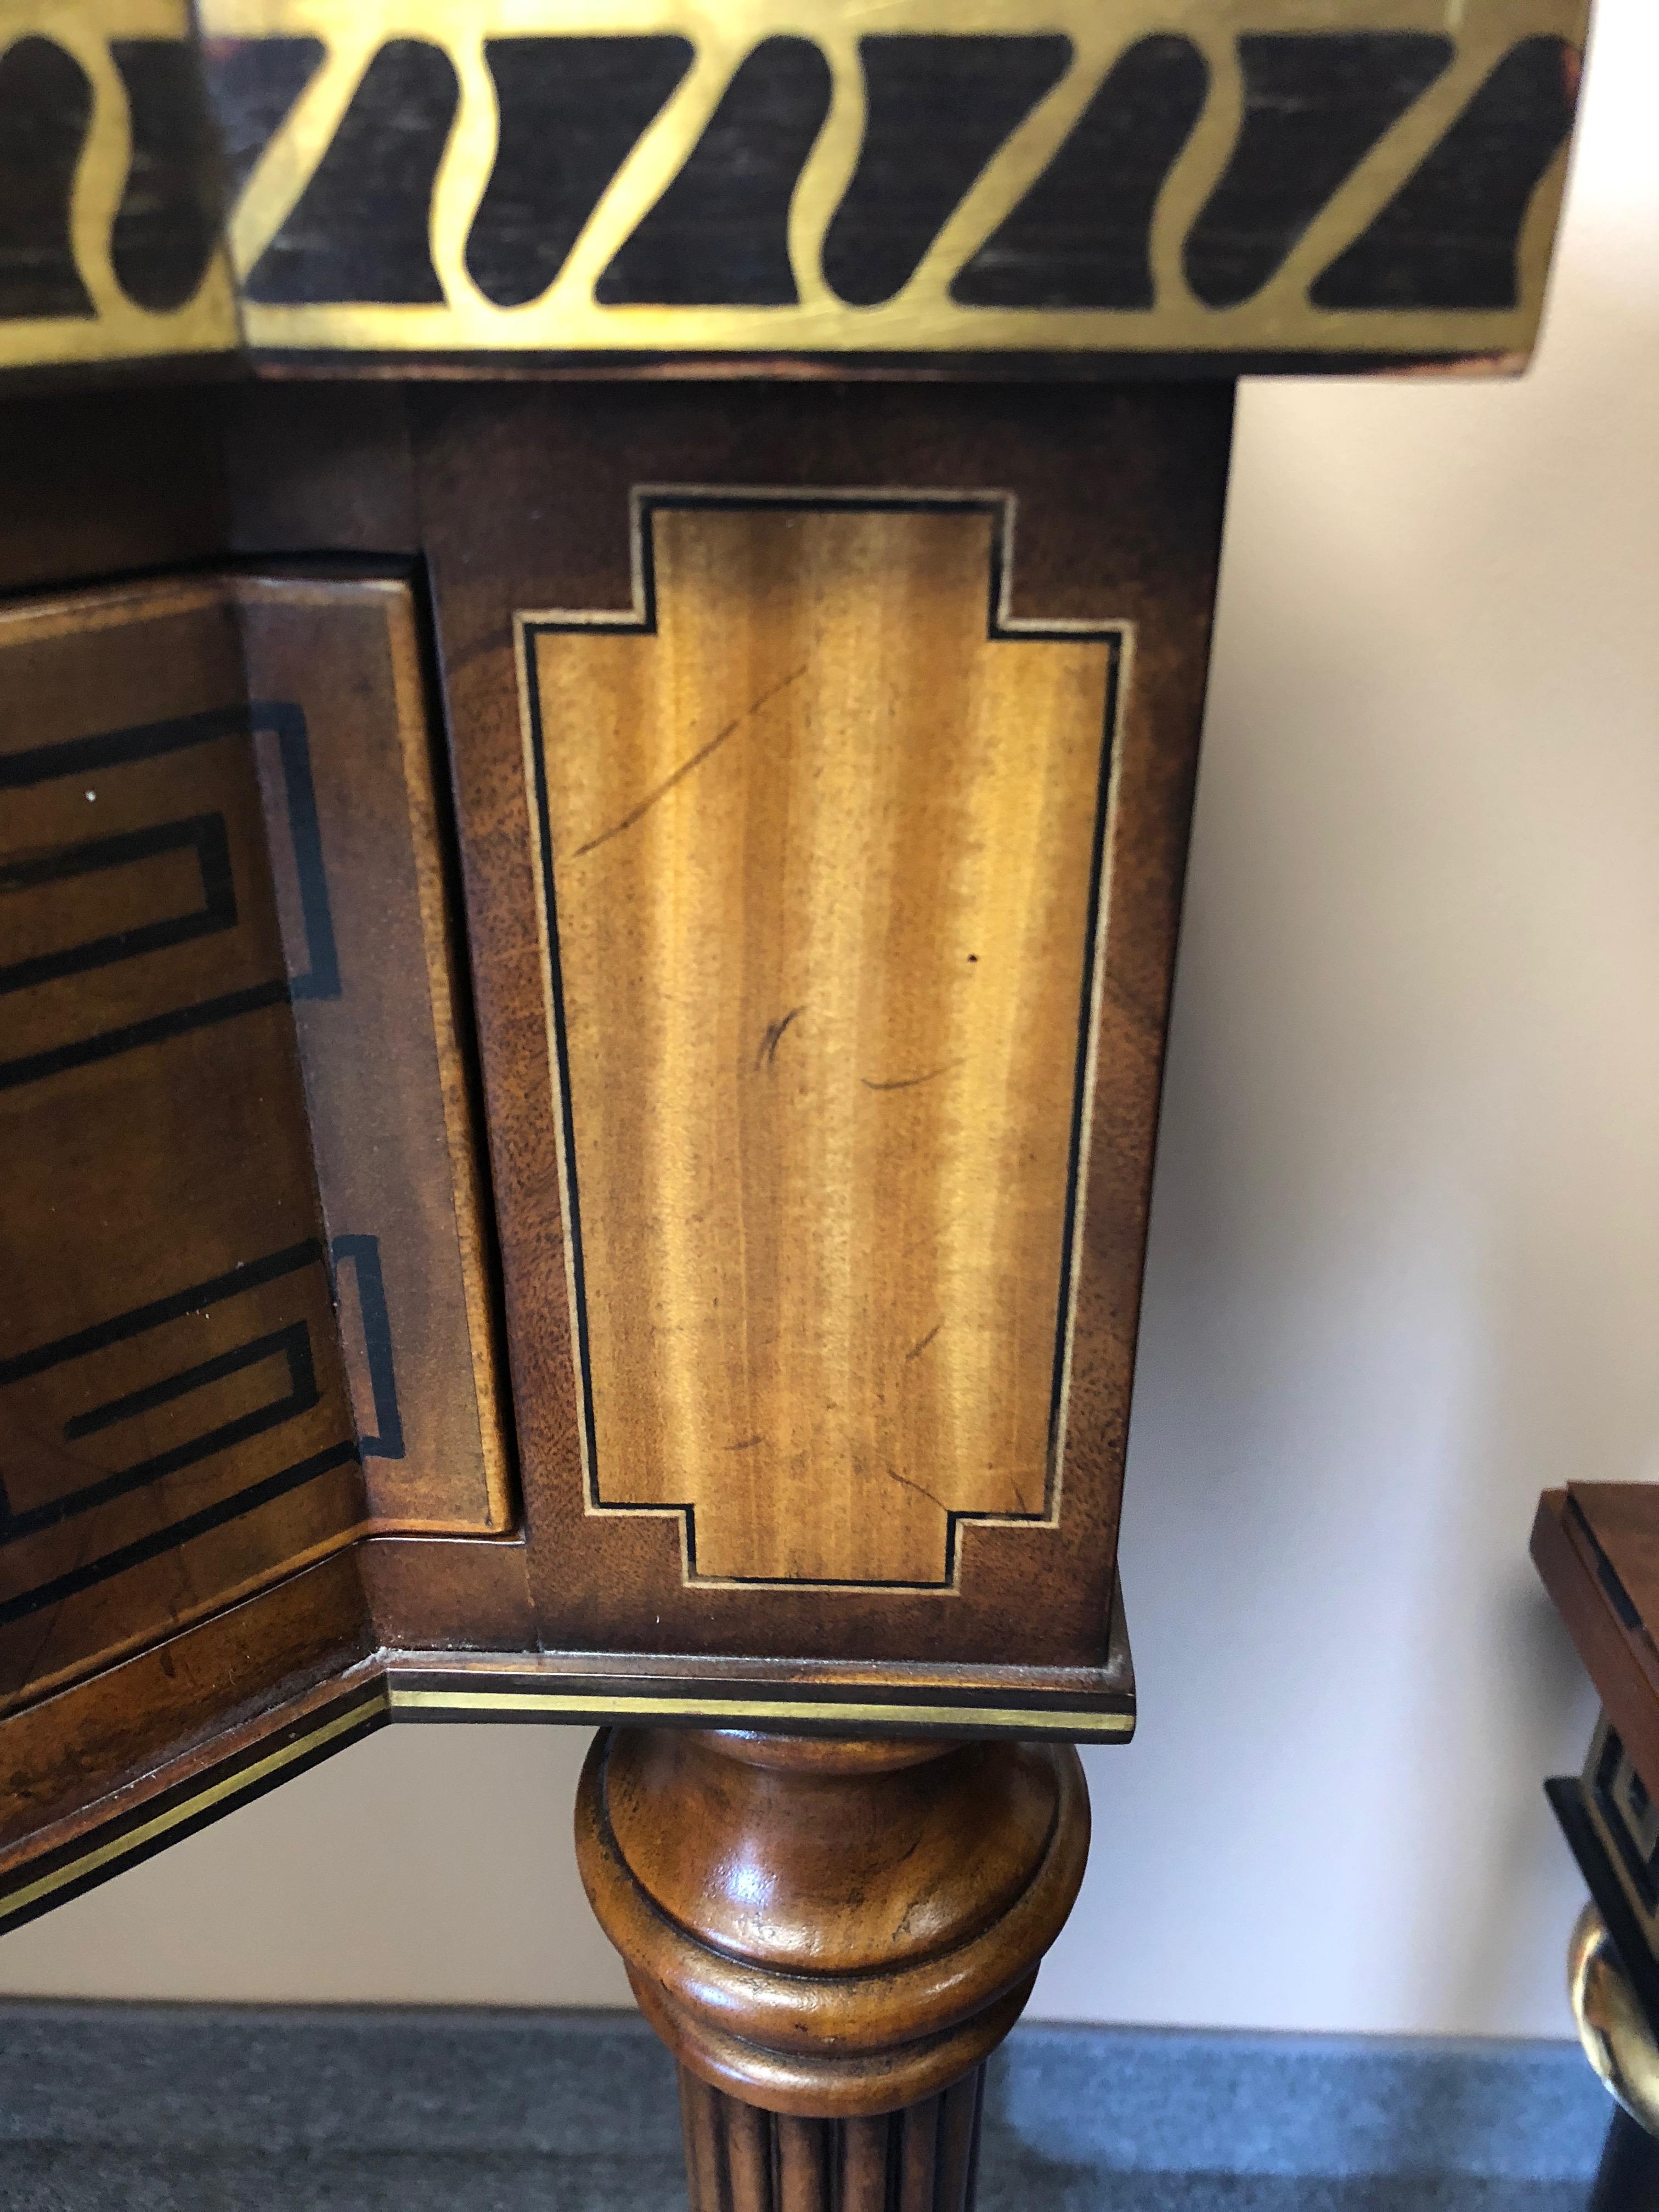 A very impressive large mahogany console table by Theodore Alexander having stunning satinwood and ebony inlay and a special touch of brass decorative inlay around the front curved edges and sides. There is also neoclassical ebony Greek key